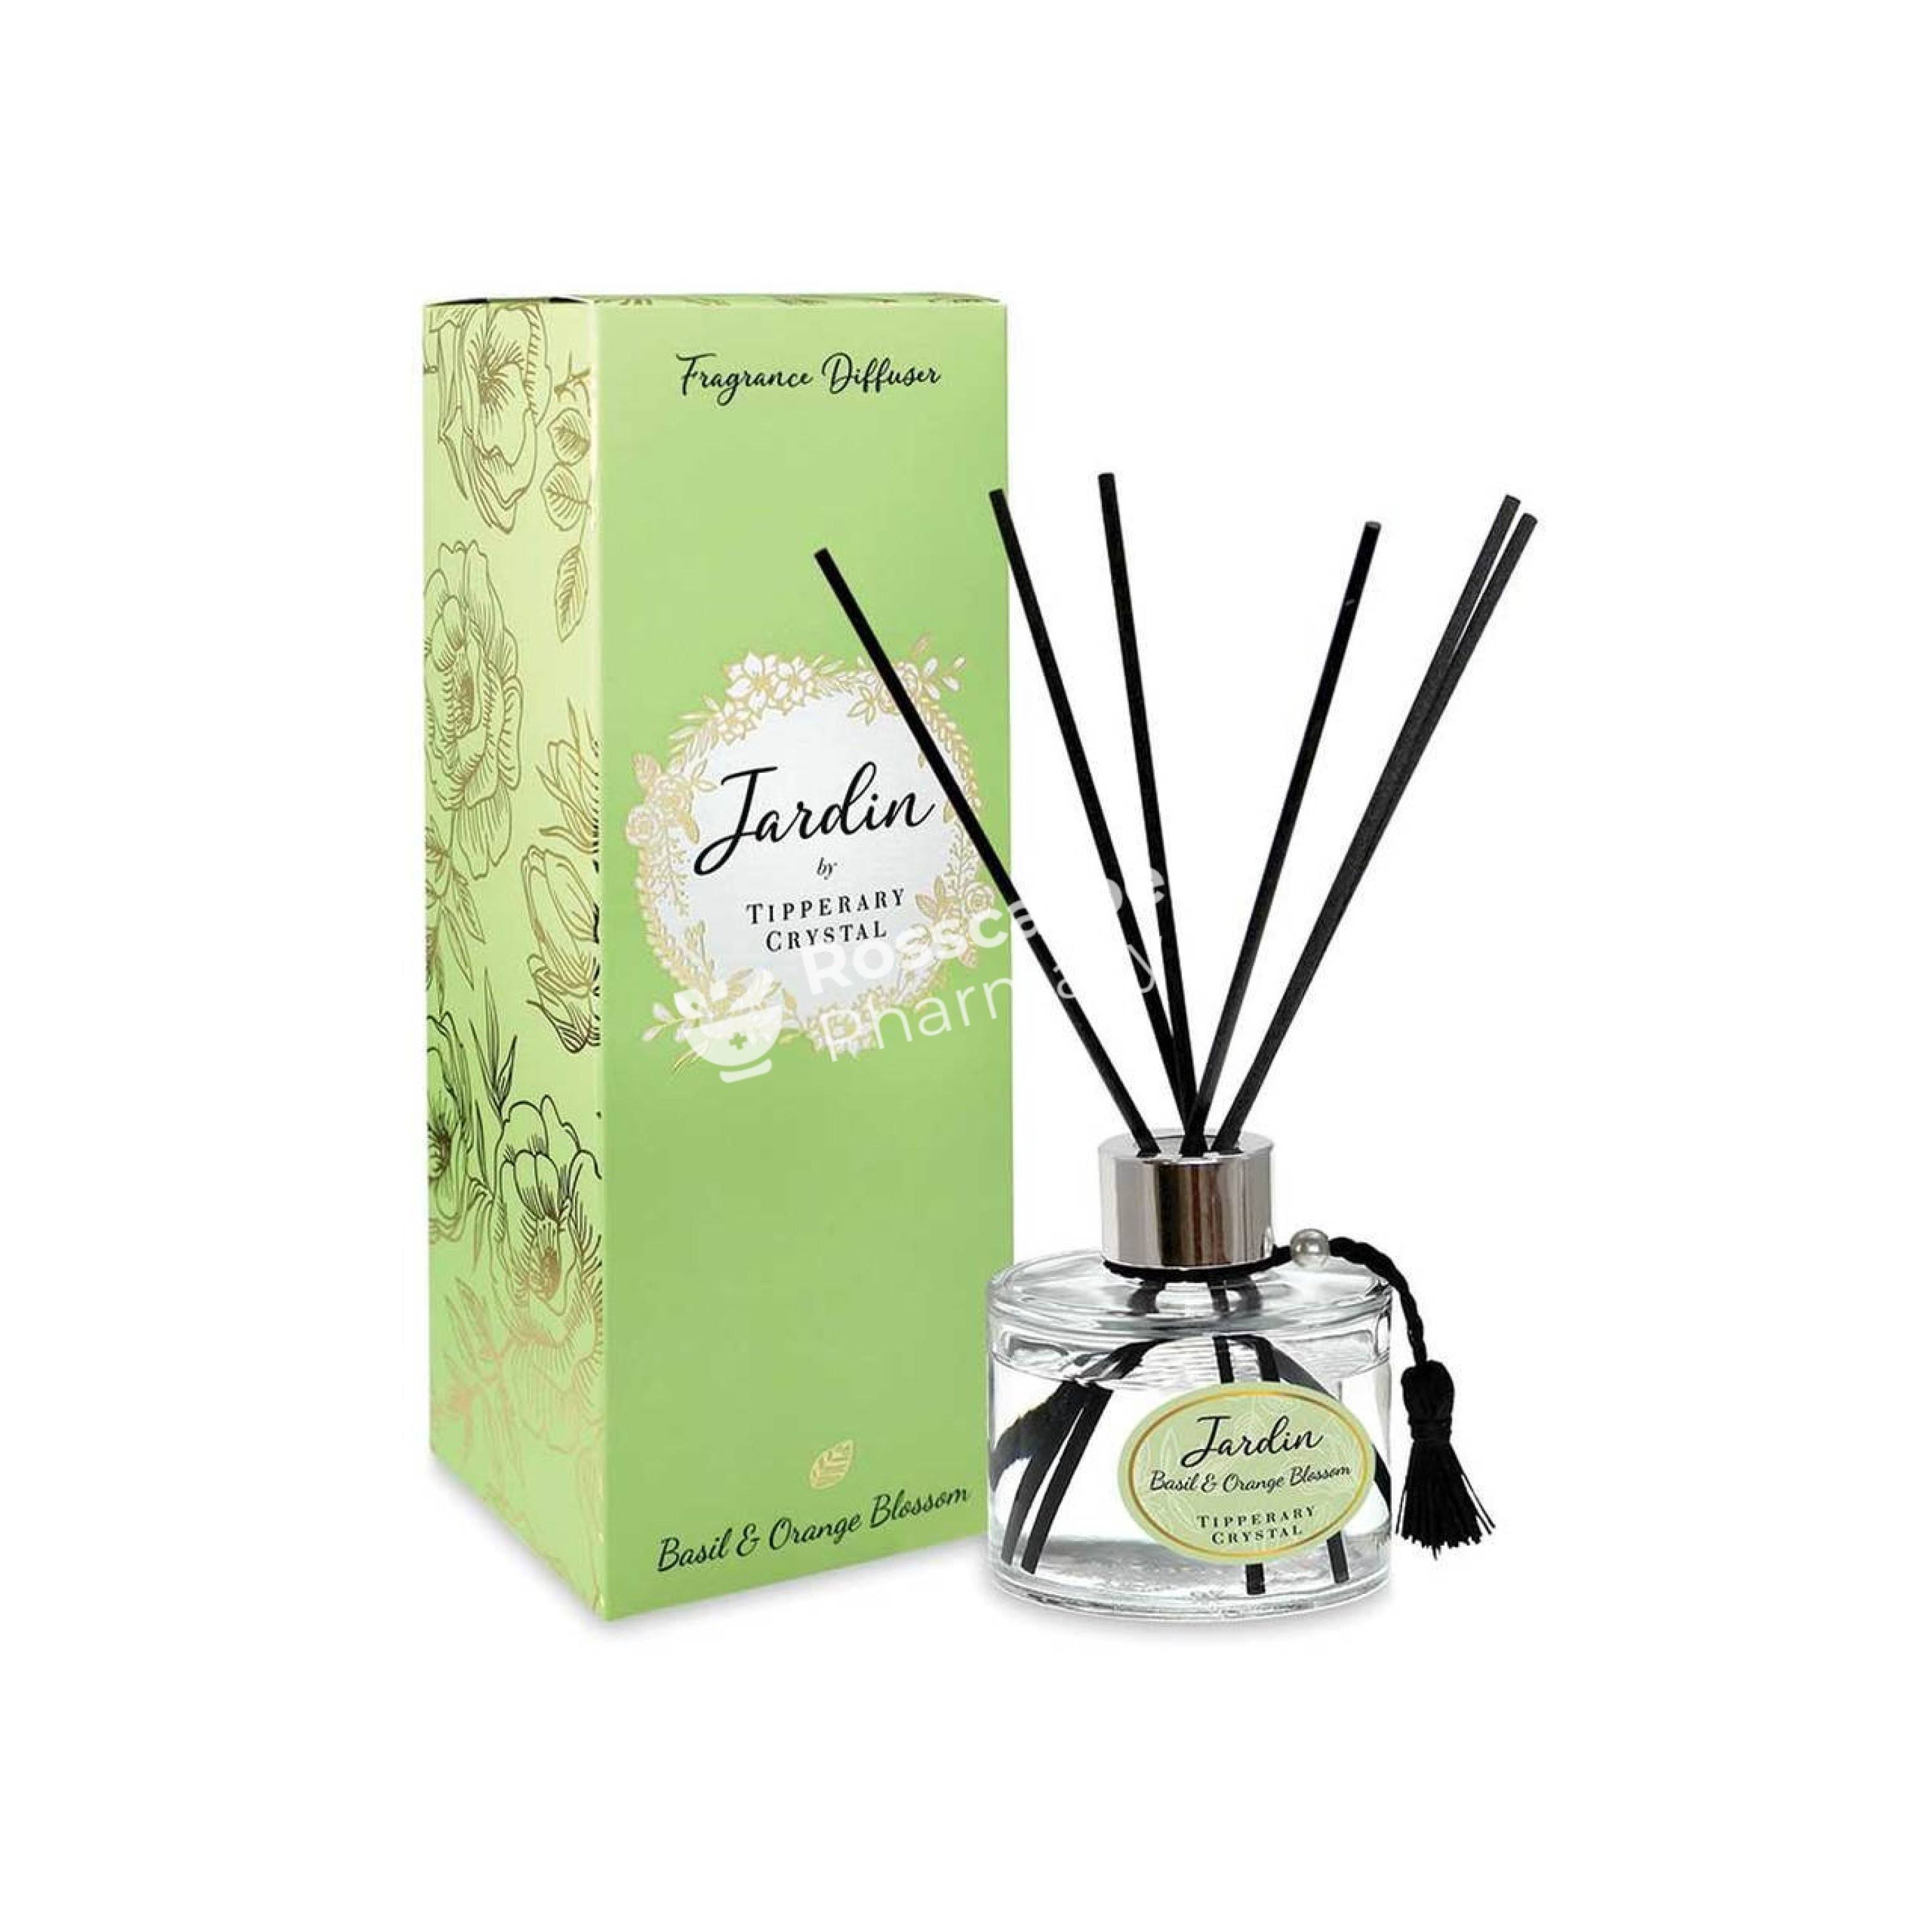 Tipperary Crystal Jardin Collection Diffuser - Basil & Orange